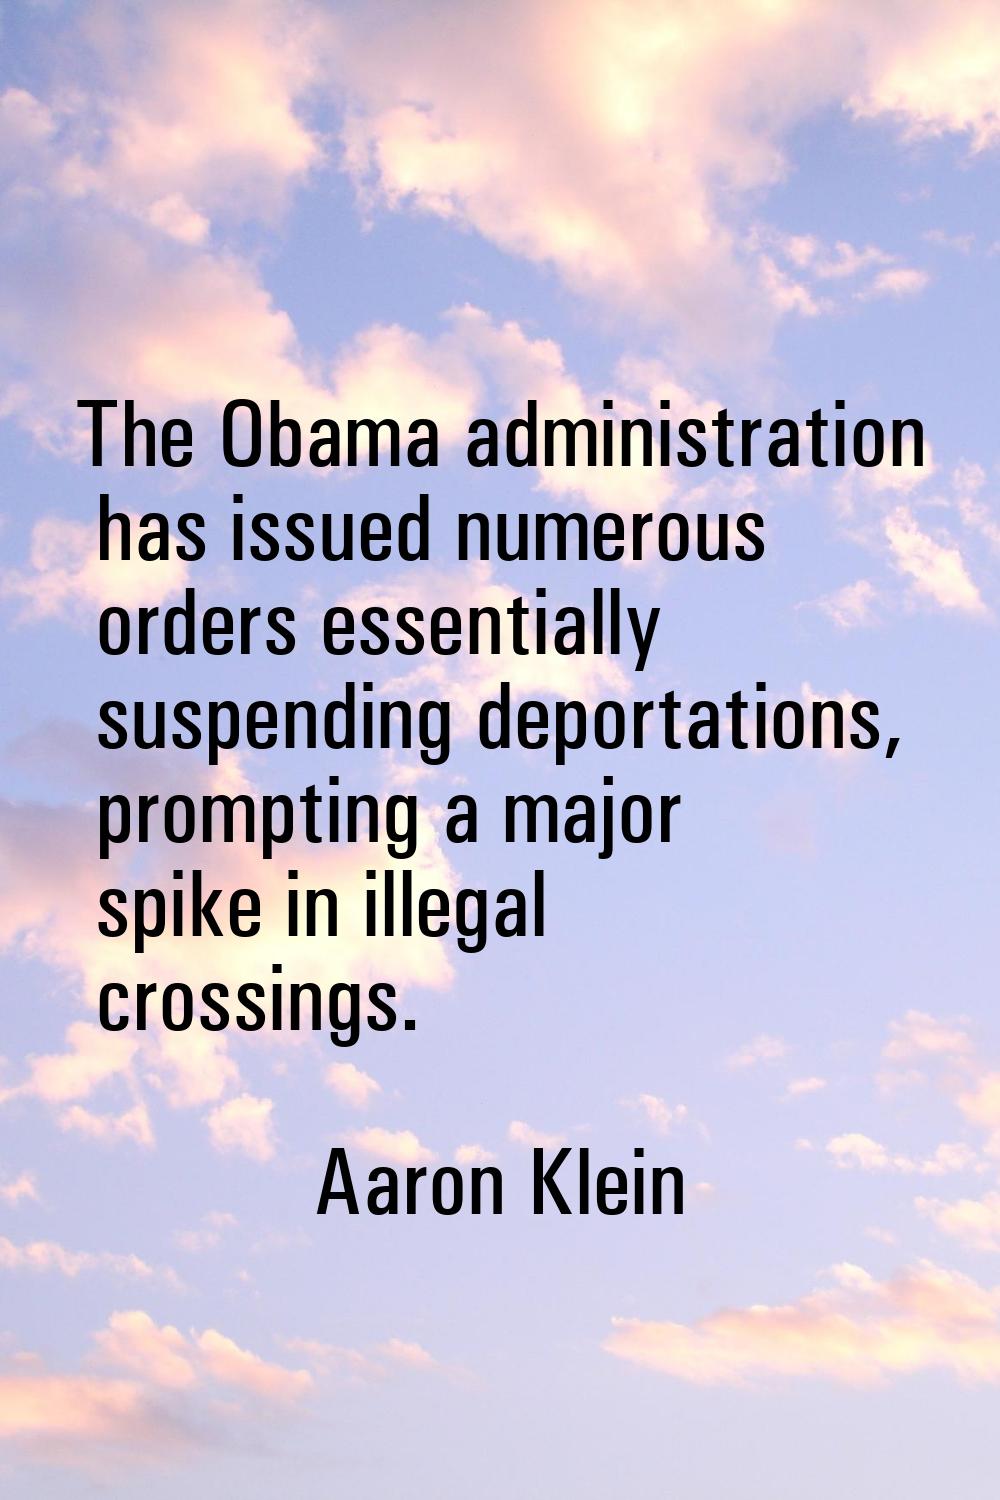 The Obama administration has issued numerous orders essentially suspending deportations, prompting 